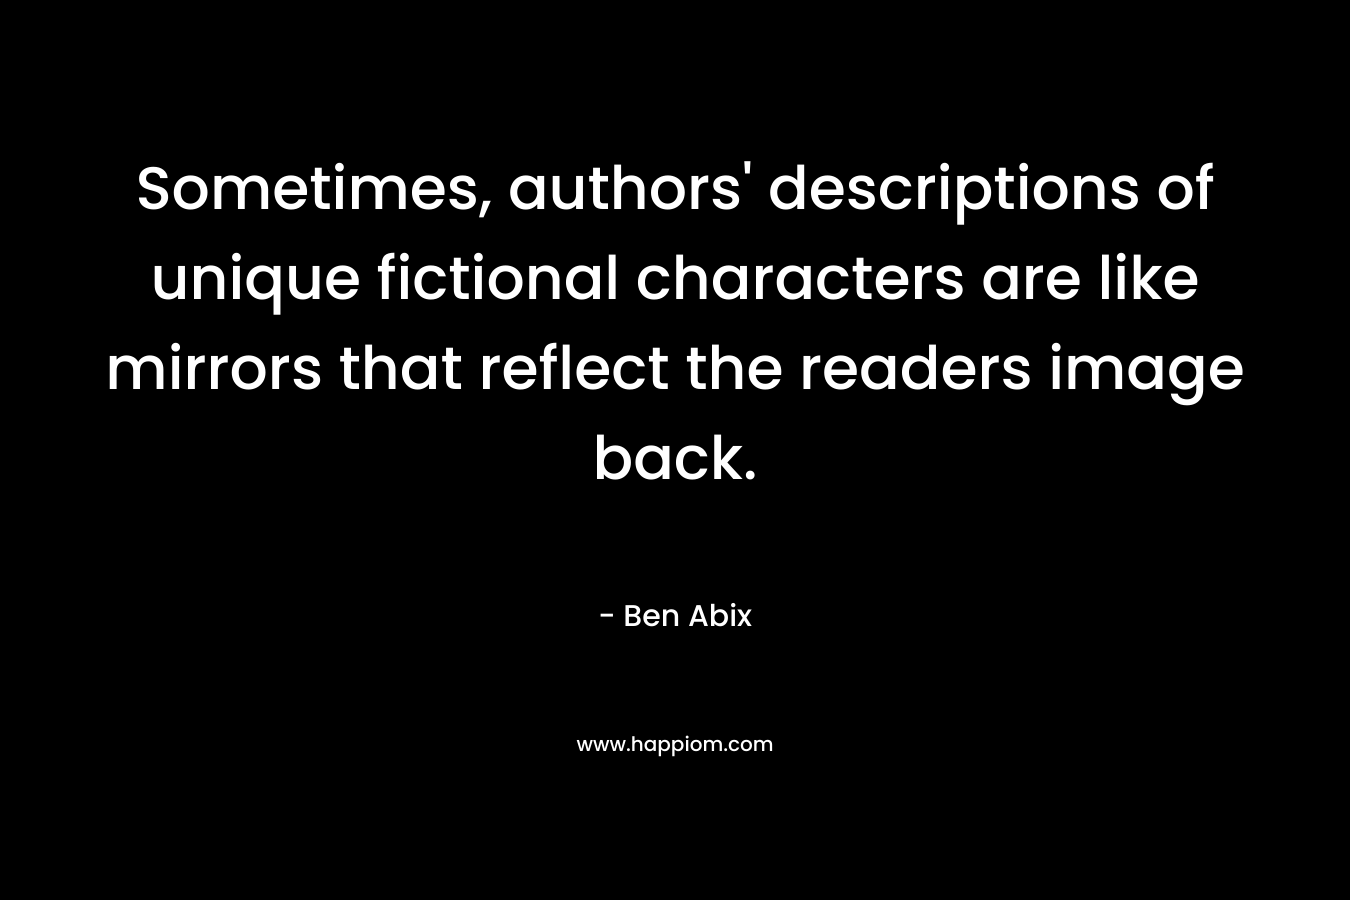 Sometimes, authors’ descriptions of unique fictional characters are like mirrors that reflect the readers image back. – Ben Abix